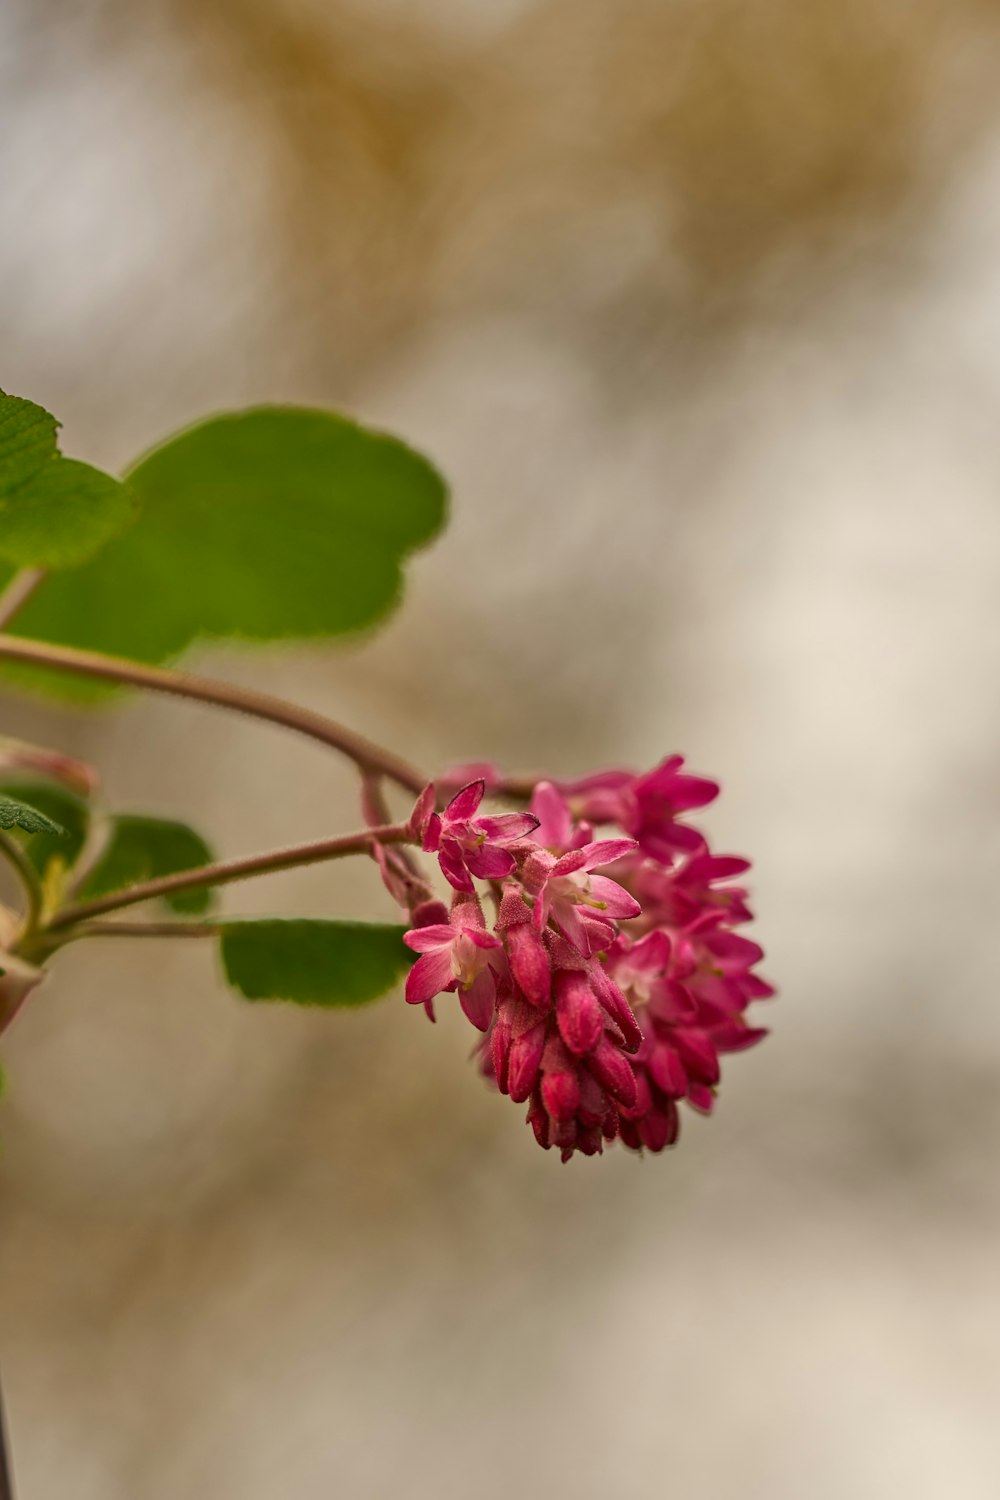 a close up of a pink flower on a branch